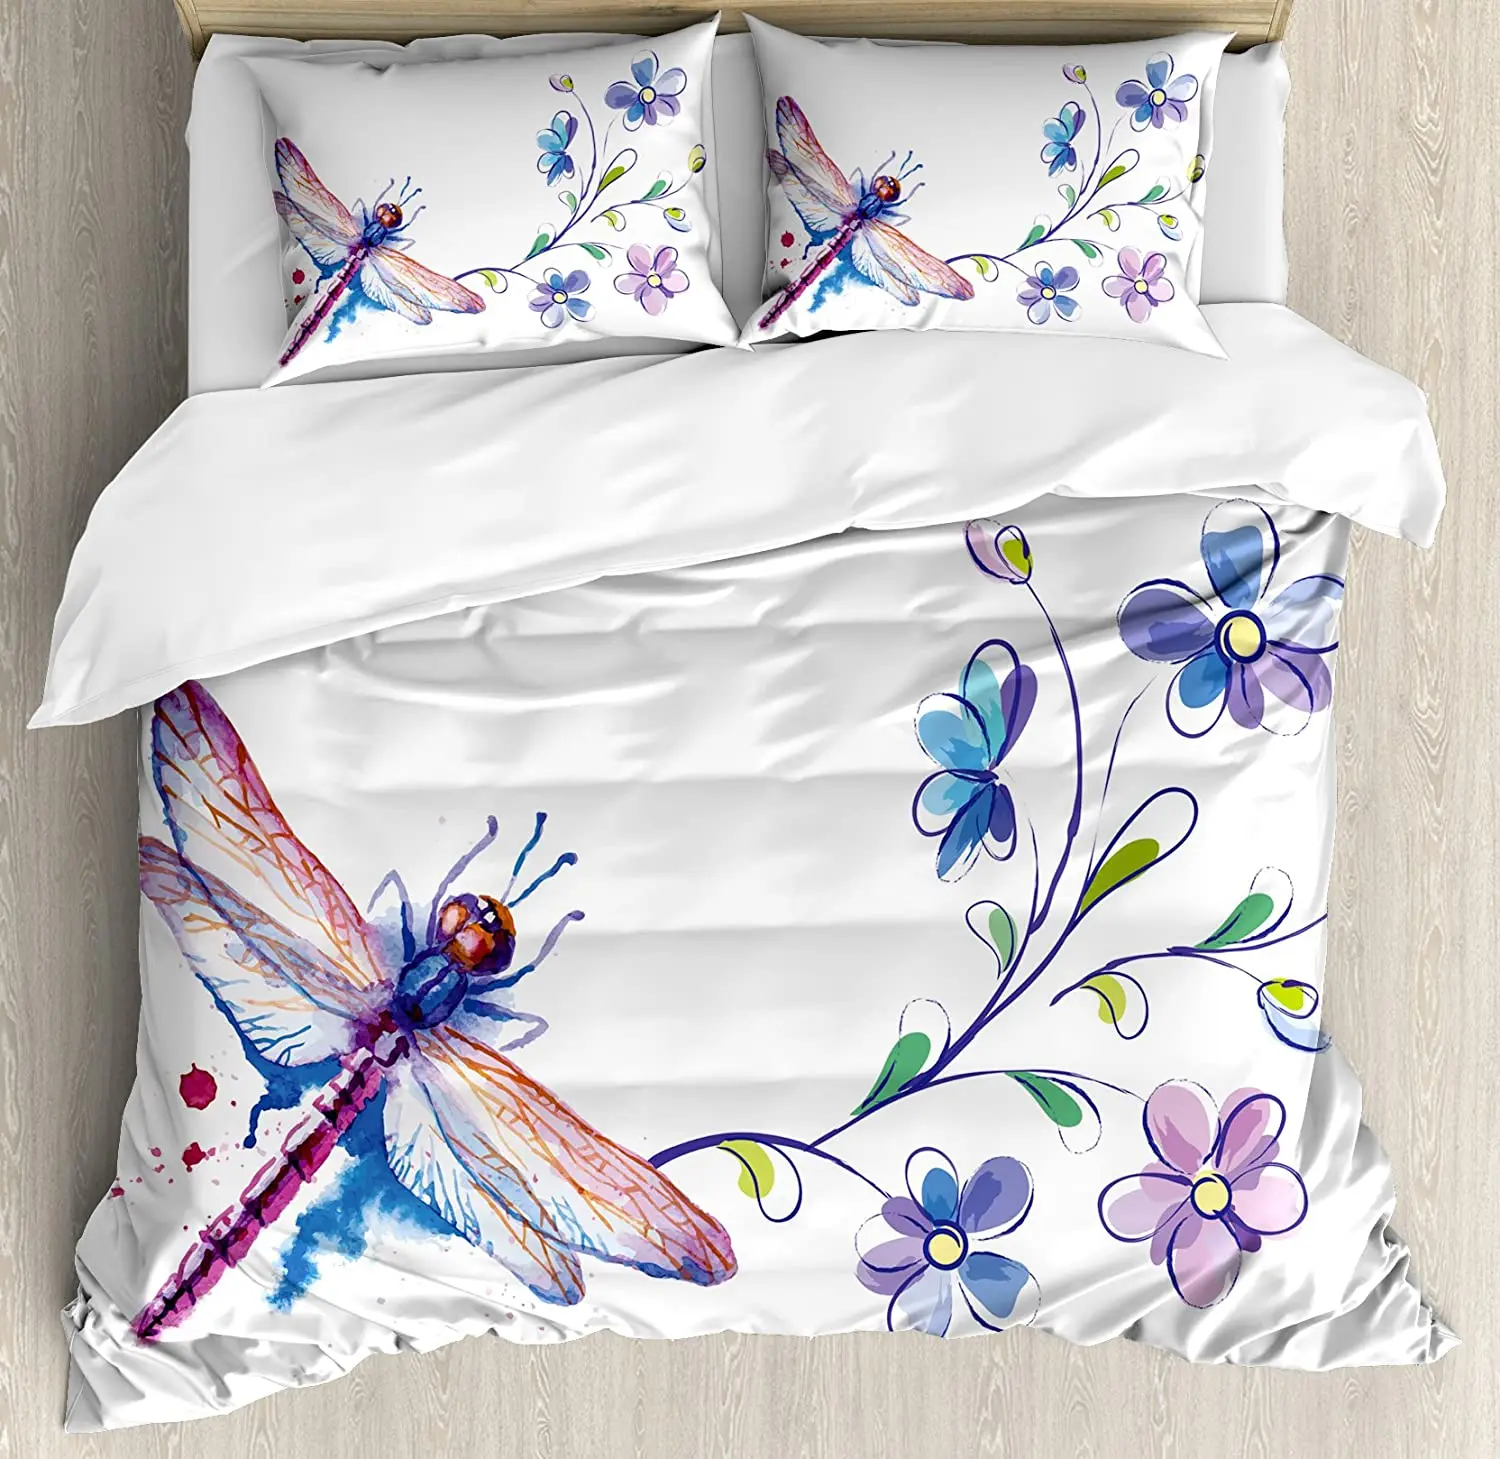 

Dragonfly Bedding Set For Bedroom Bed Home Watercolor Bug Butterfly Like Moth with Branch Duvet Cover Quilt Cover And Pillowcase